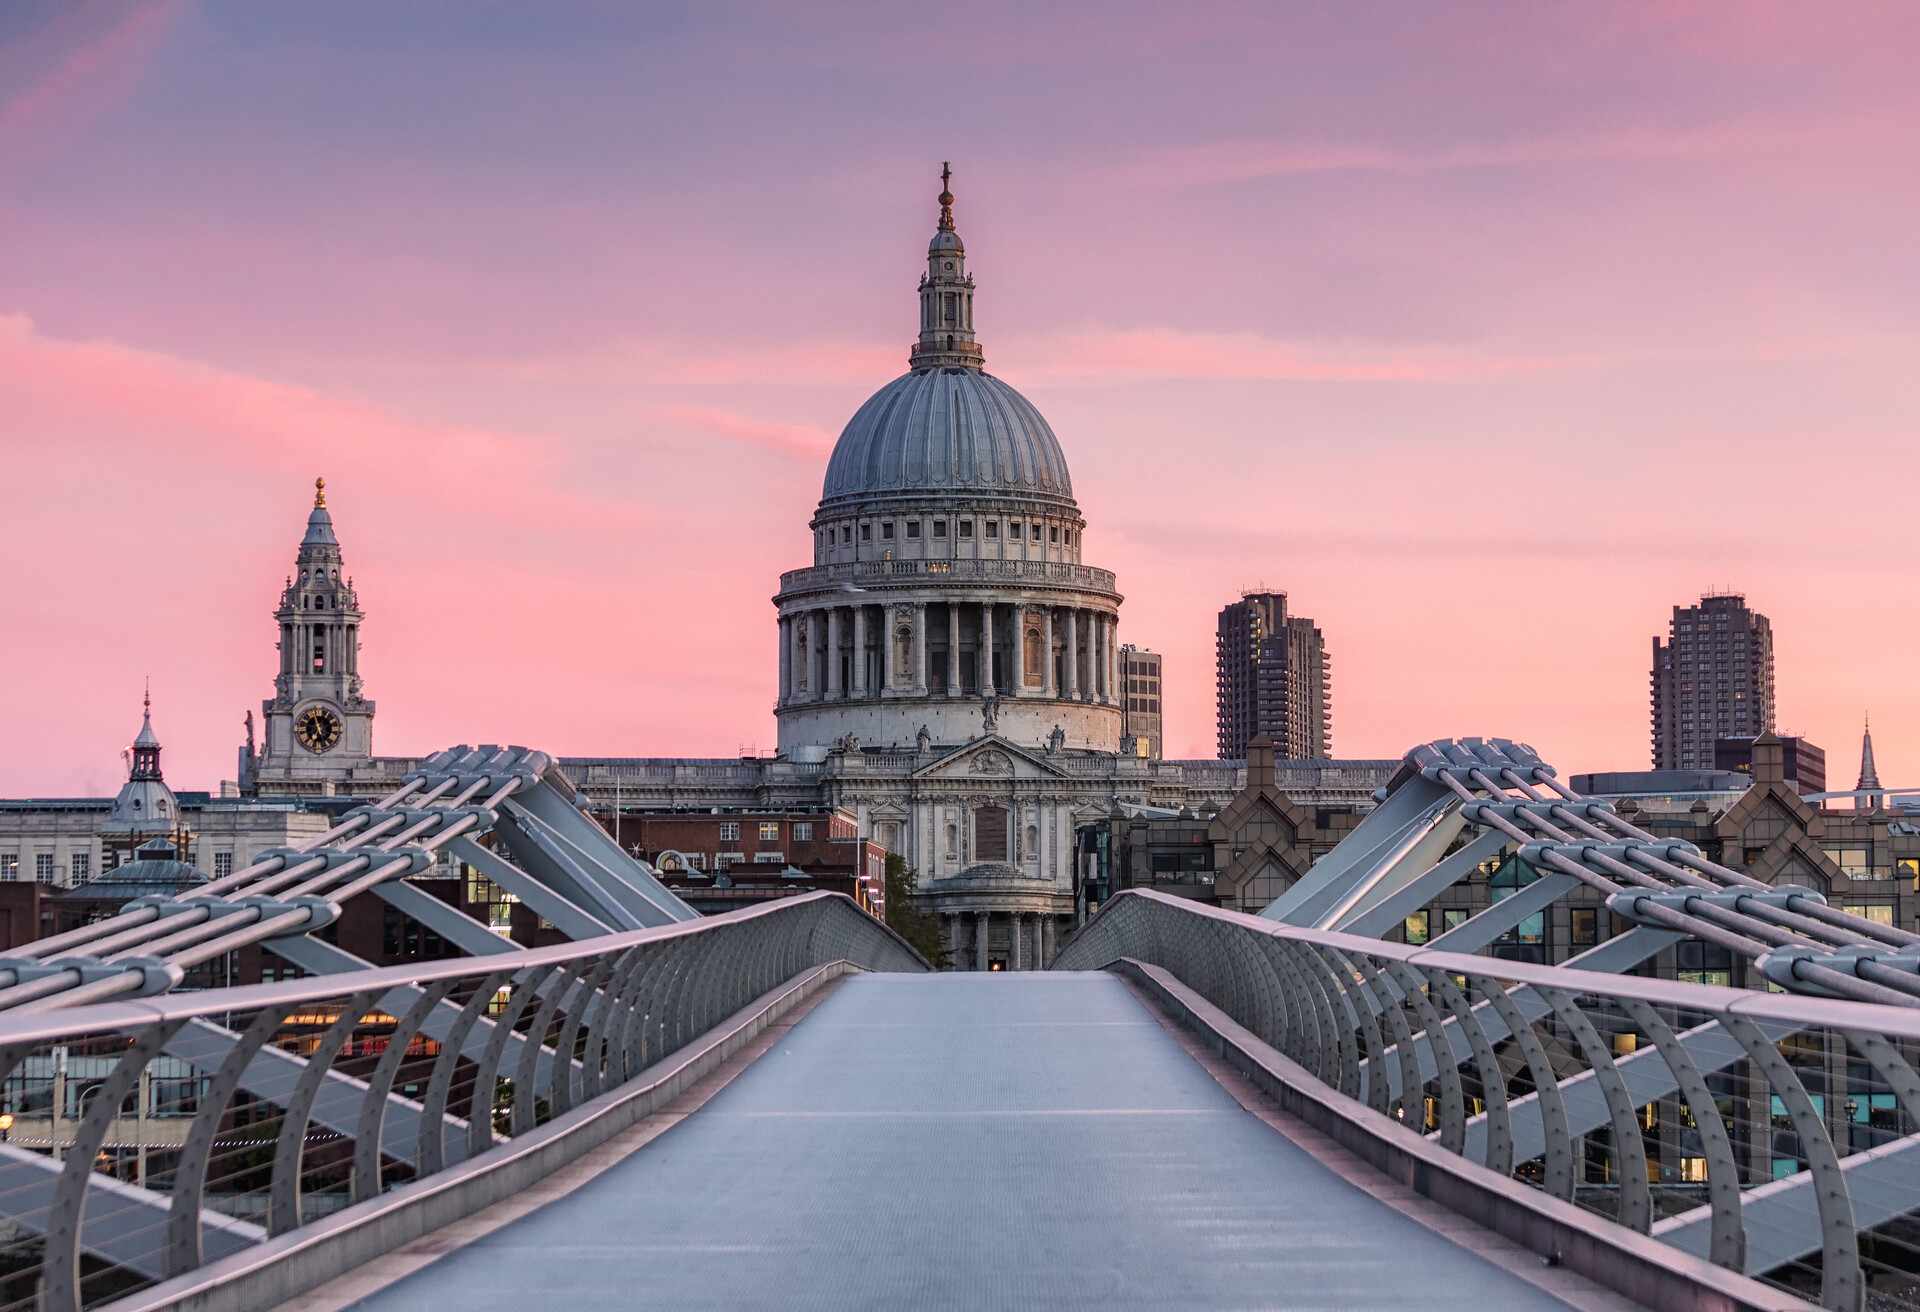 Millennium Bridge, London, UK. October 7, 2018. An early morning view of St Paul's Cathedral from the Millennium Bridge, London. The sky glows pink from the rising sun.